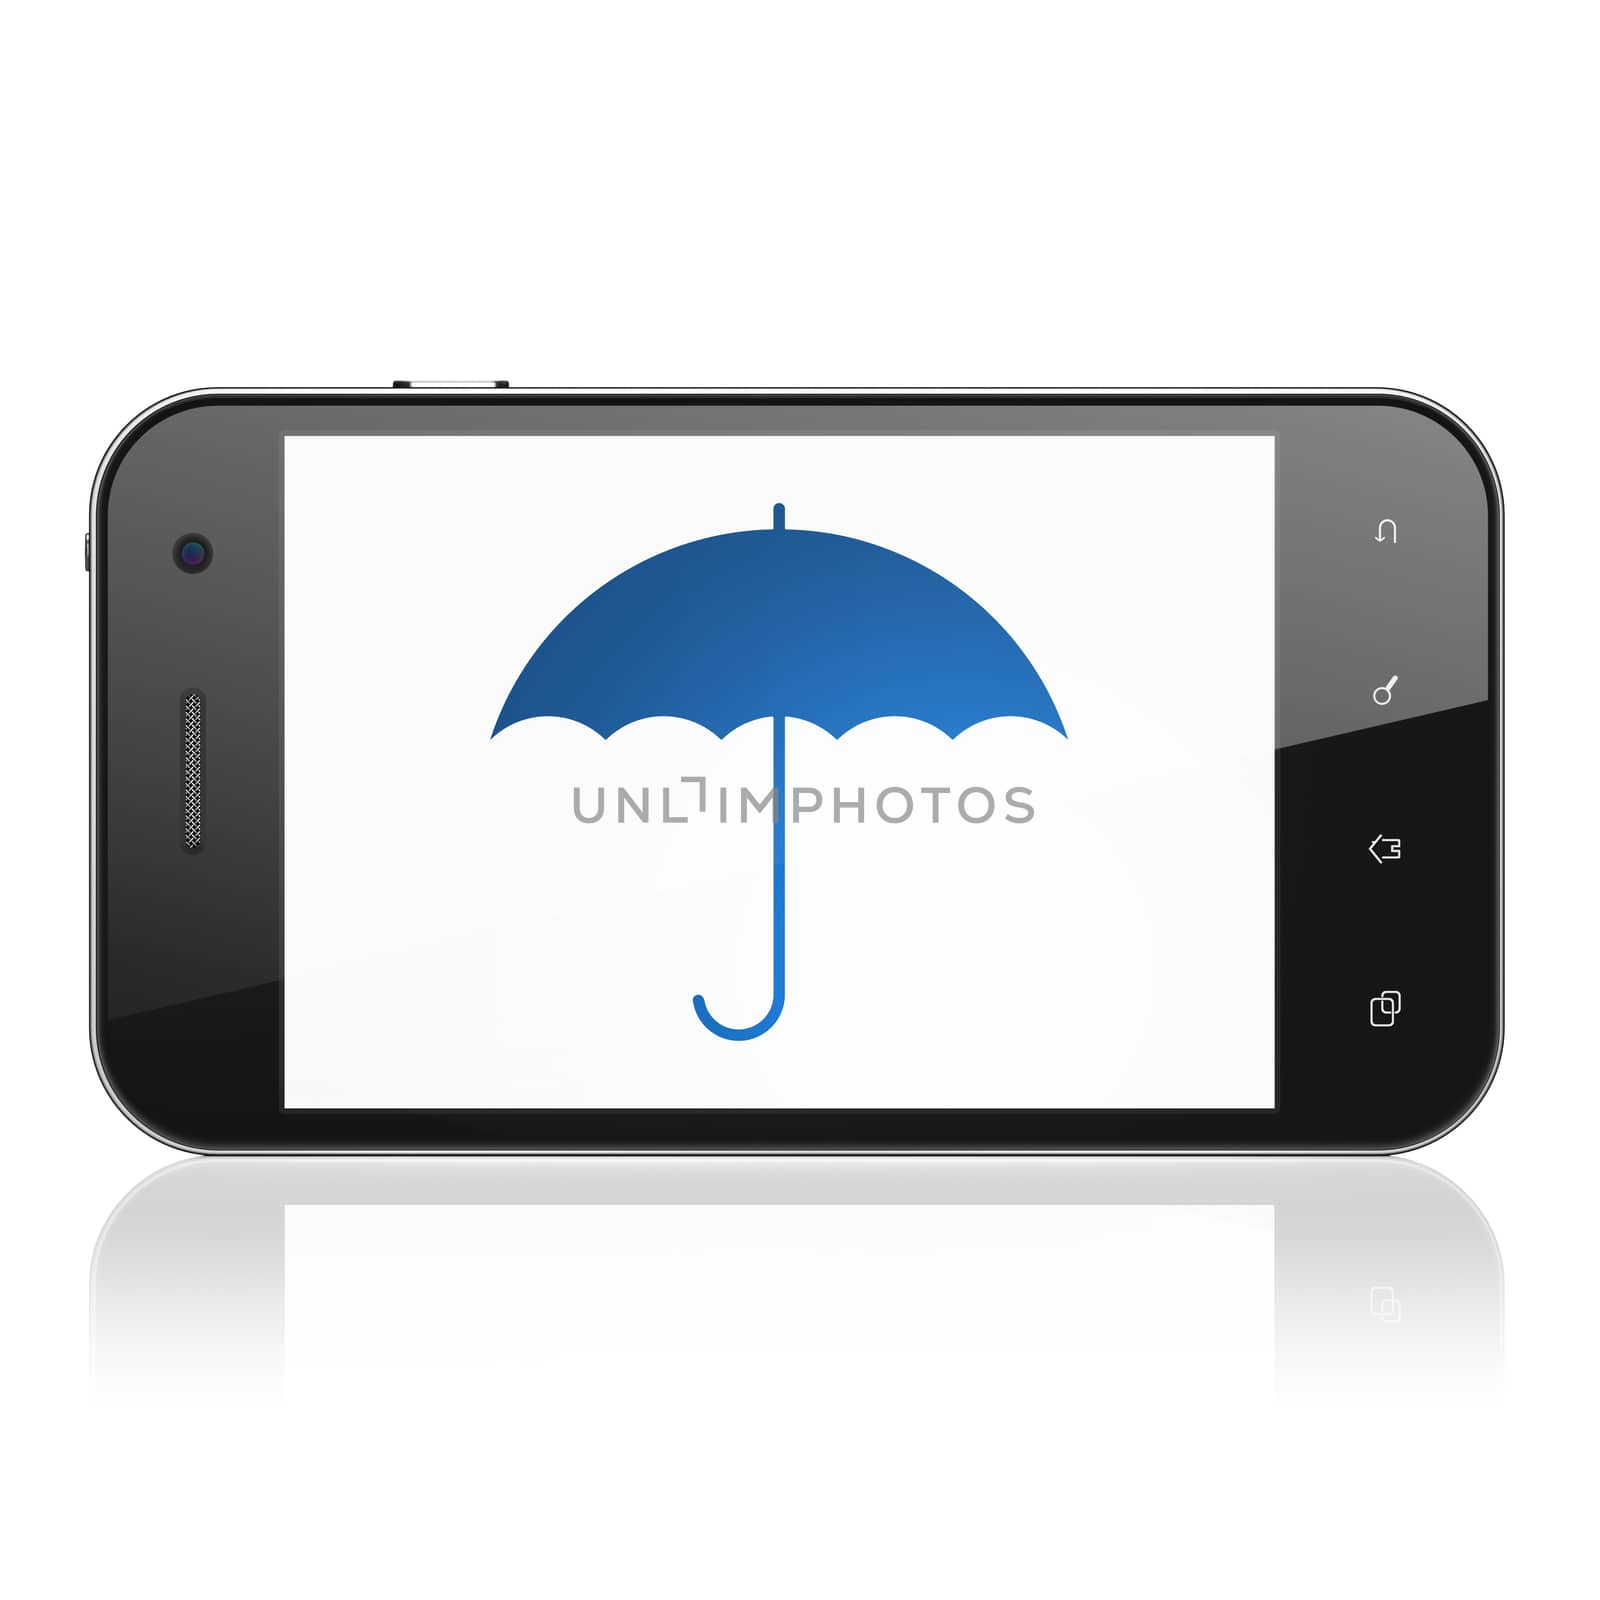 Protection concept: smartphone with Umbrella icon on display. Mobile smart phone on White background, cell phone 3d render